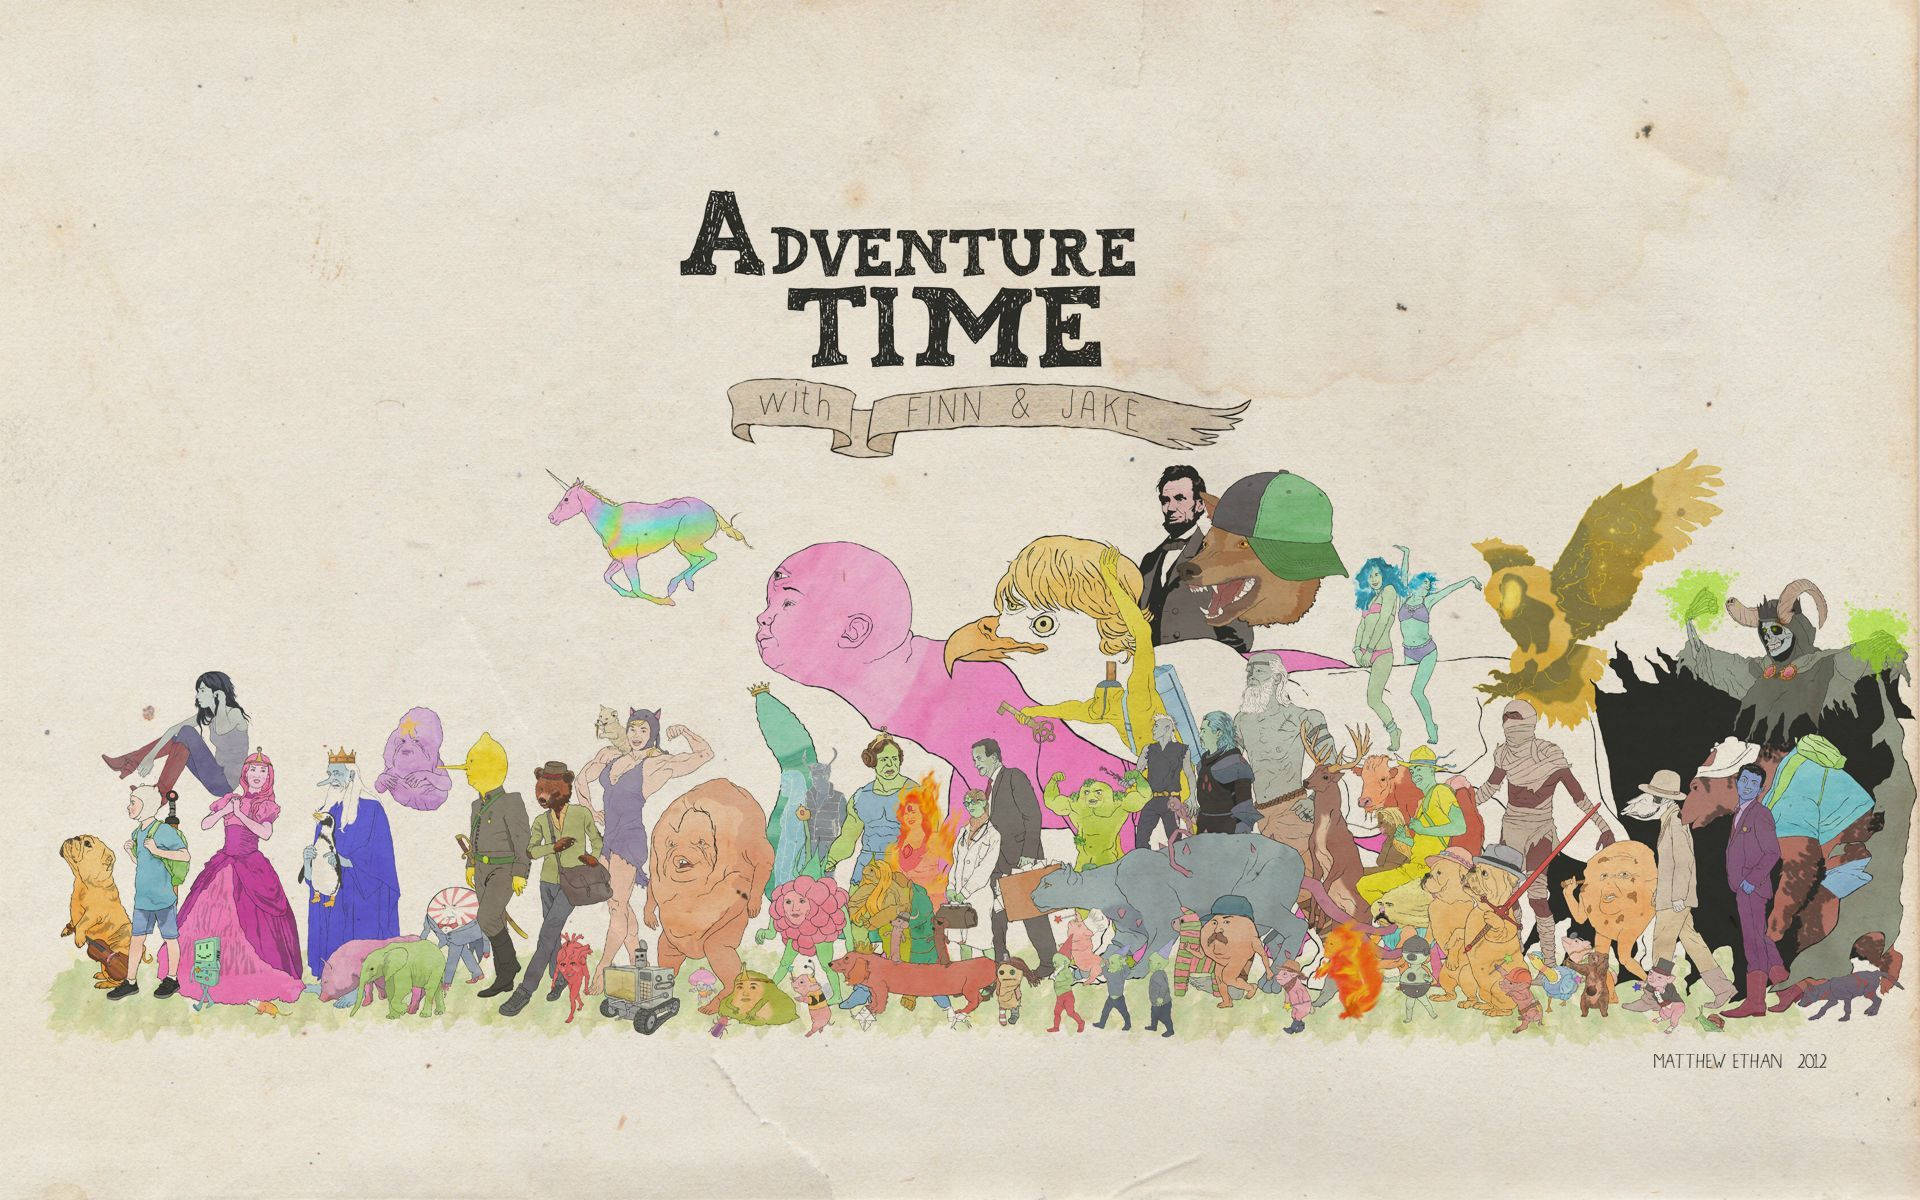 The best Adventure Time wallpaper you can find online. - Adventure Time